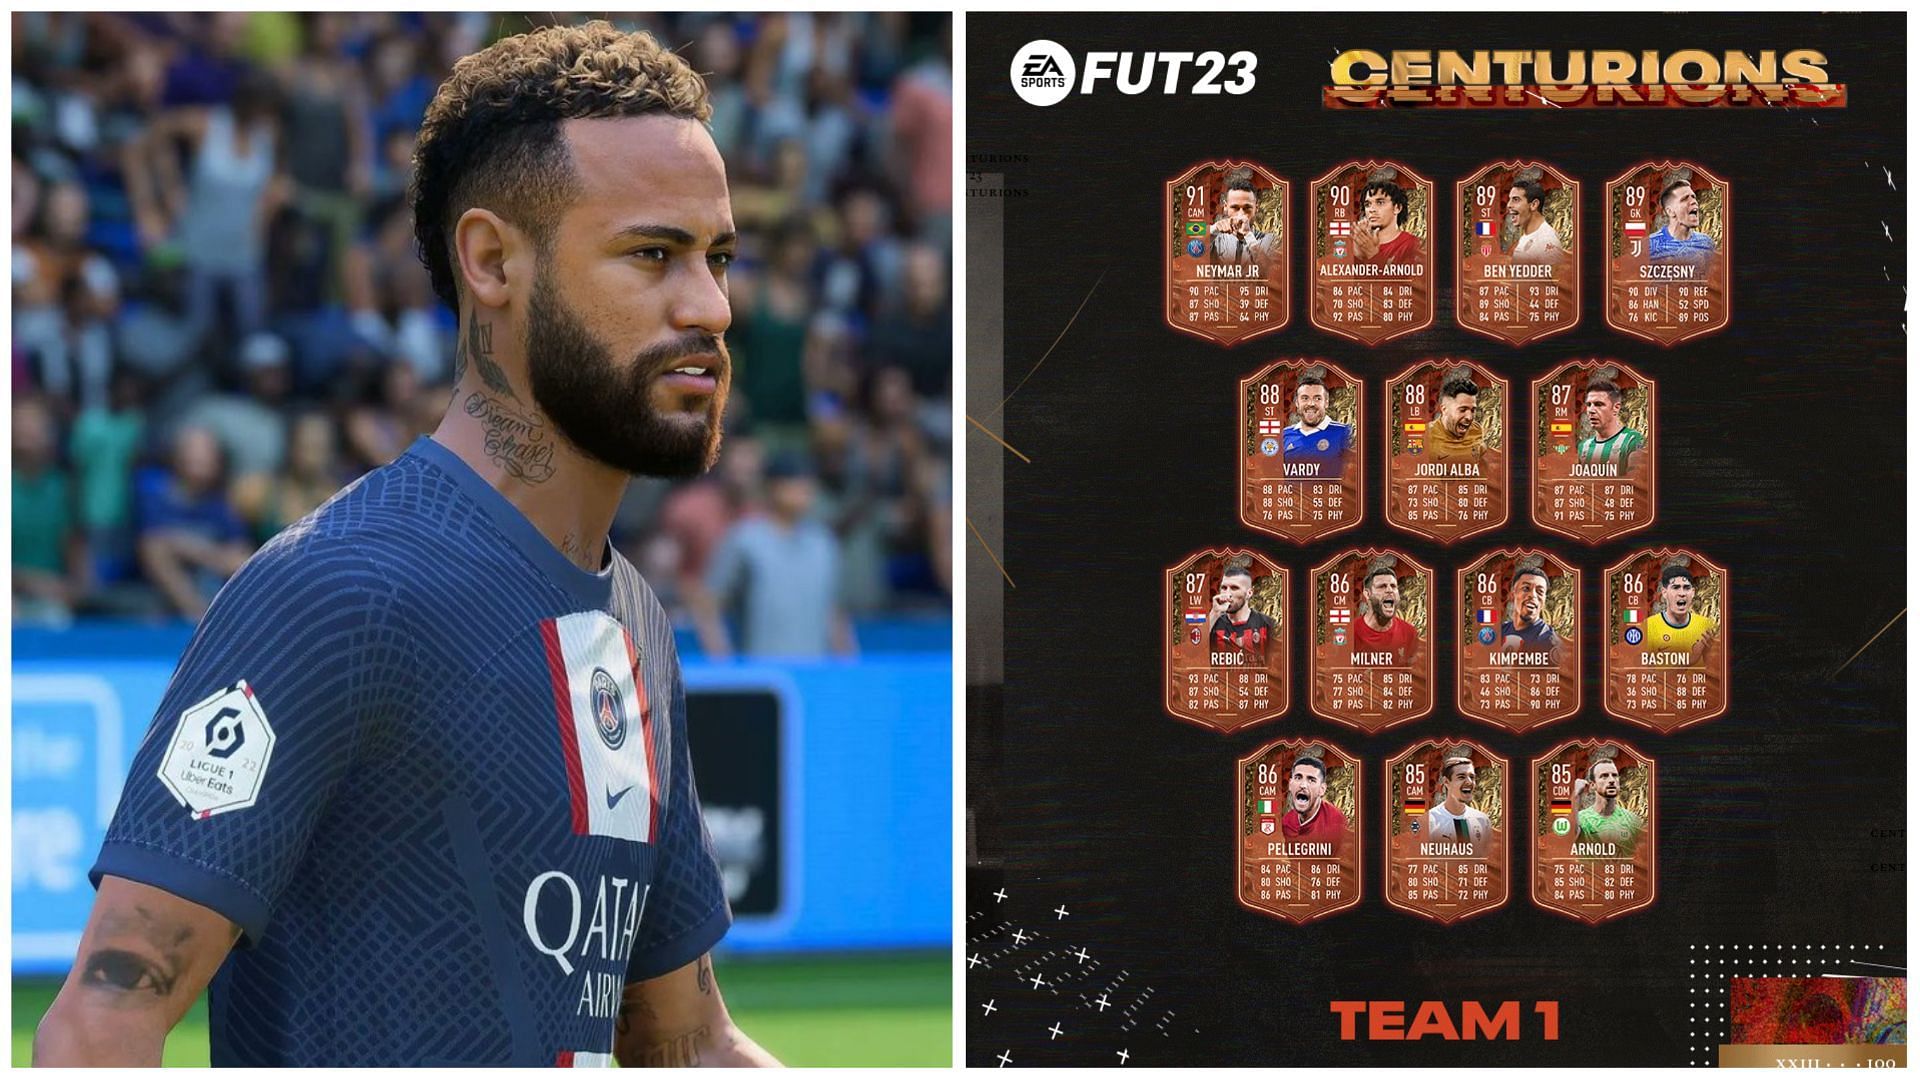 The FUT Centurions promo is live in FIFA 23 (Images via EA Sports)